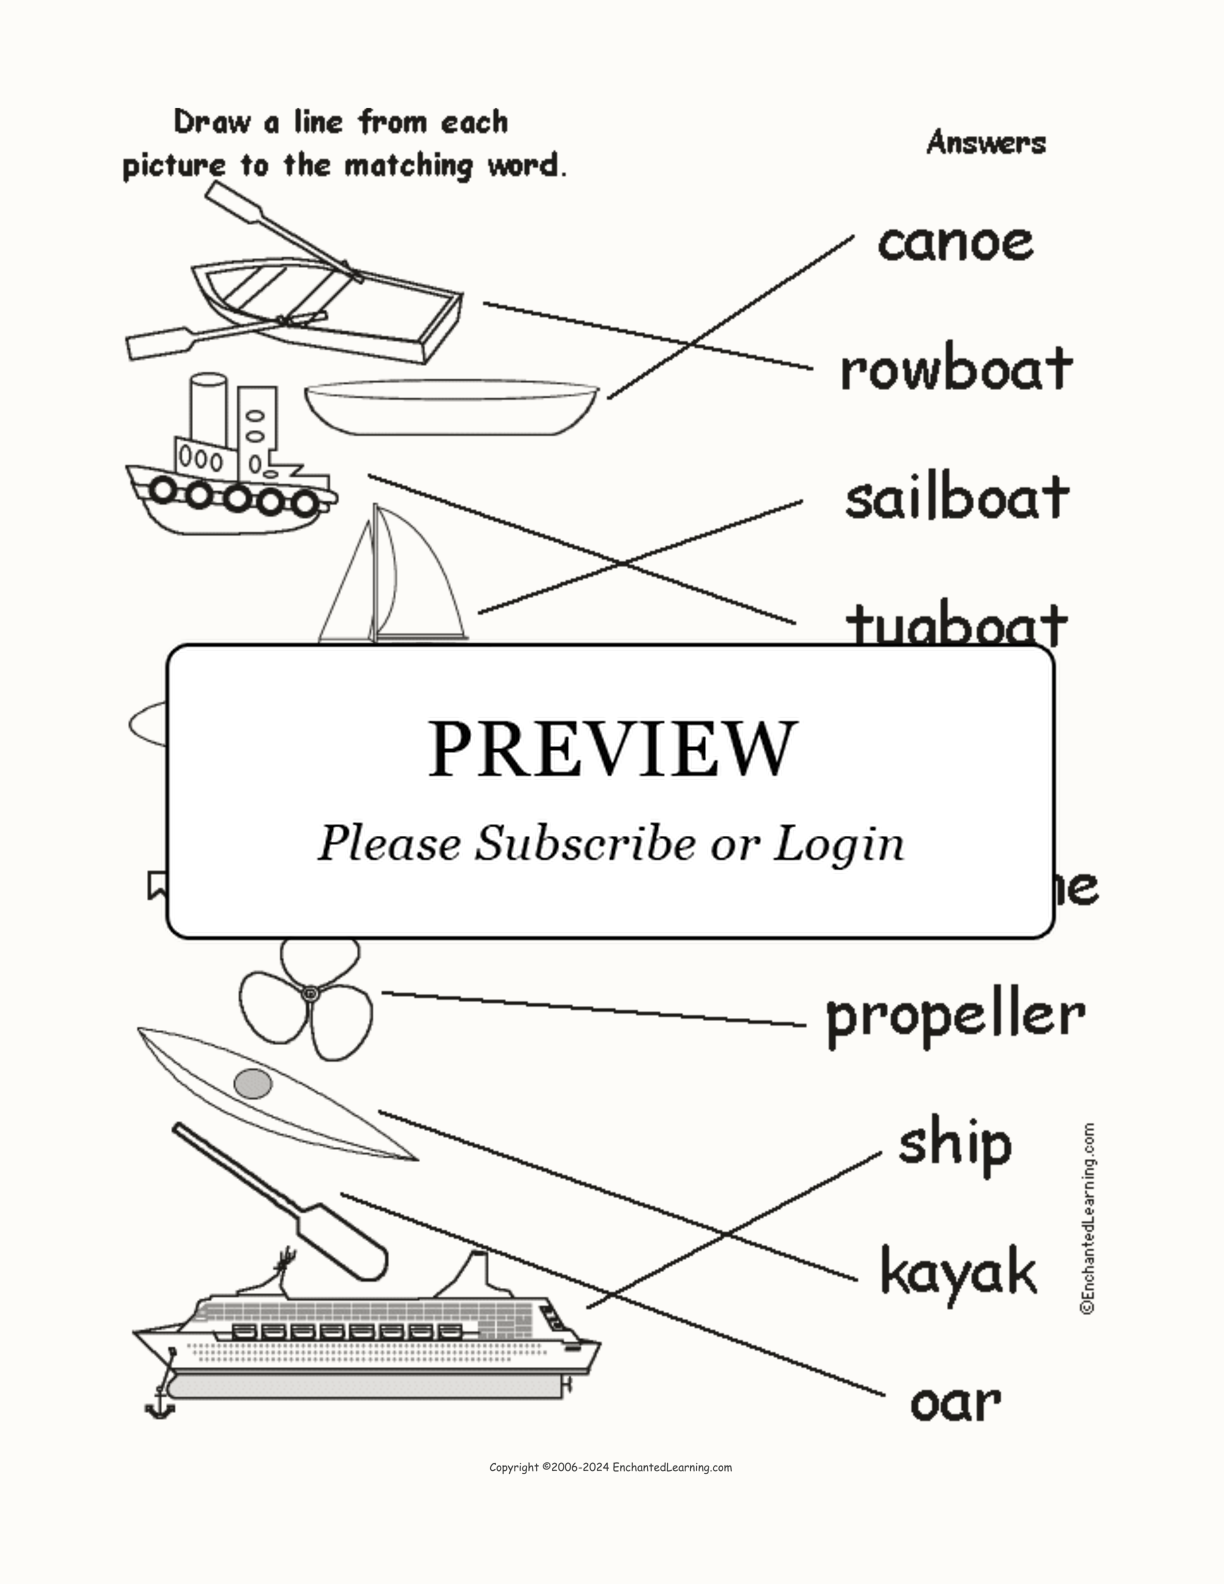 Match Each Boat Word to its Picture interactive worksheet page 2